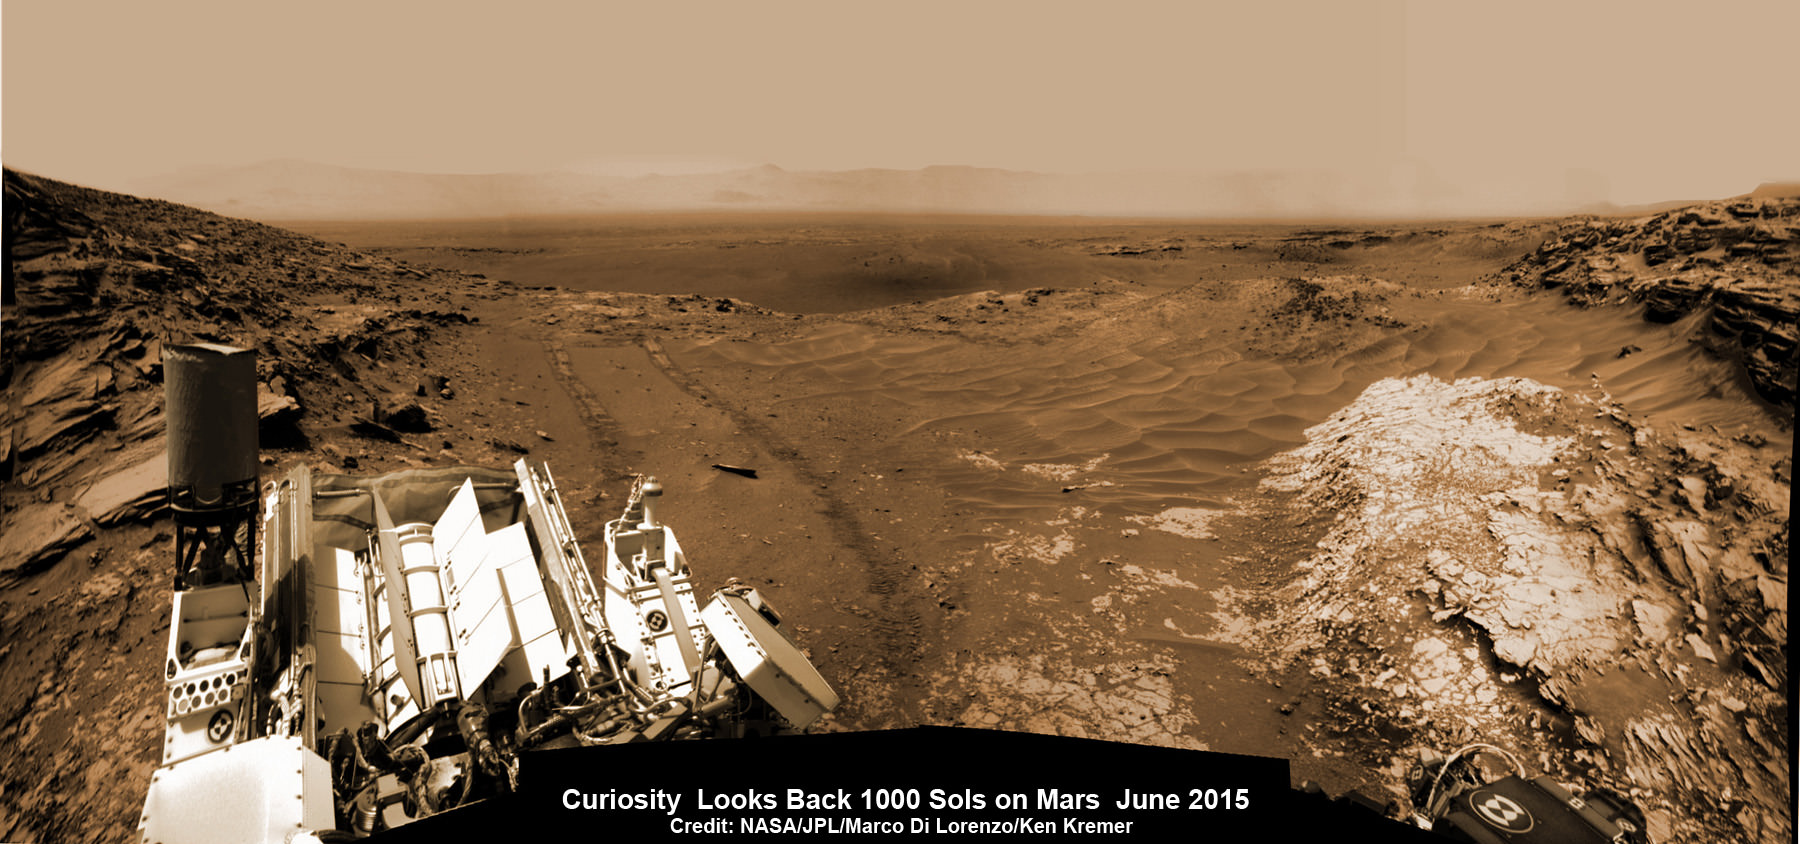 NASA’s Martian Curiosity rover looks backs to 1000 Sols of science and exploration on the surface of the Red Planet.  Robot wheel tracks lead back through valley dunes.  Gale Crater rim seen in the distant hazy background.  Sol 997 (May 28, 2015) navcam camera raw images stitched and colorized. Credit:  NASA/JPL-Caltech/ Marco Di Lorenzo/Ken Kremer/kenkremer.com Featured on APOD on June 13, 2015